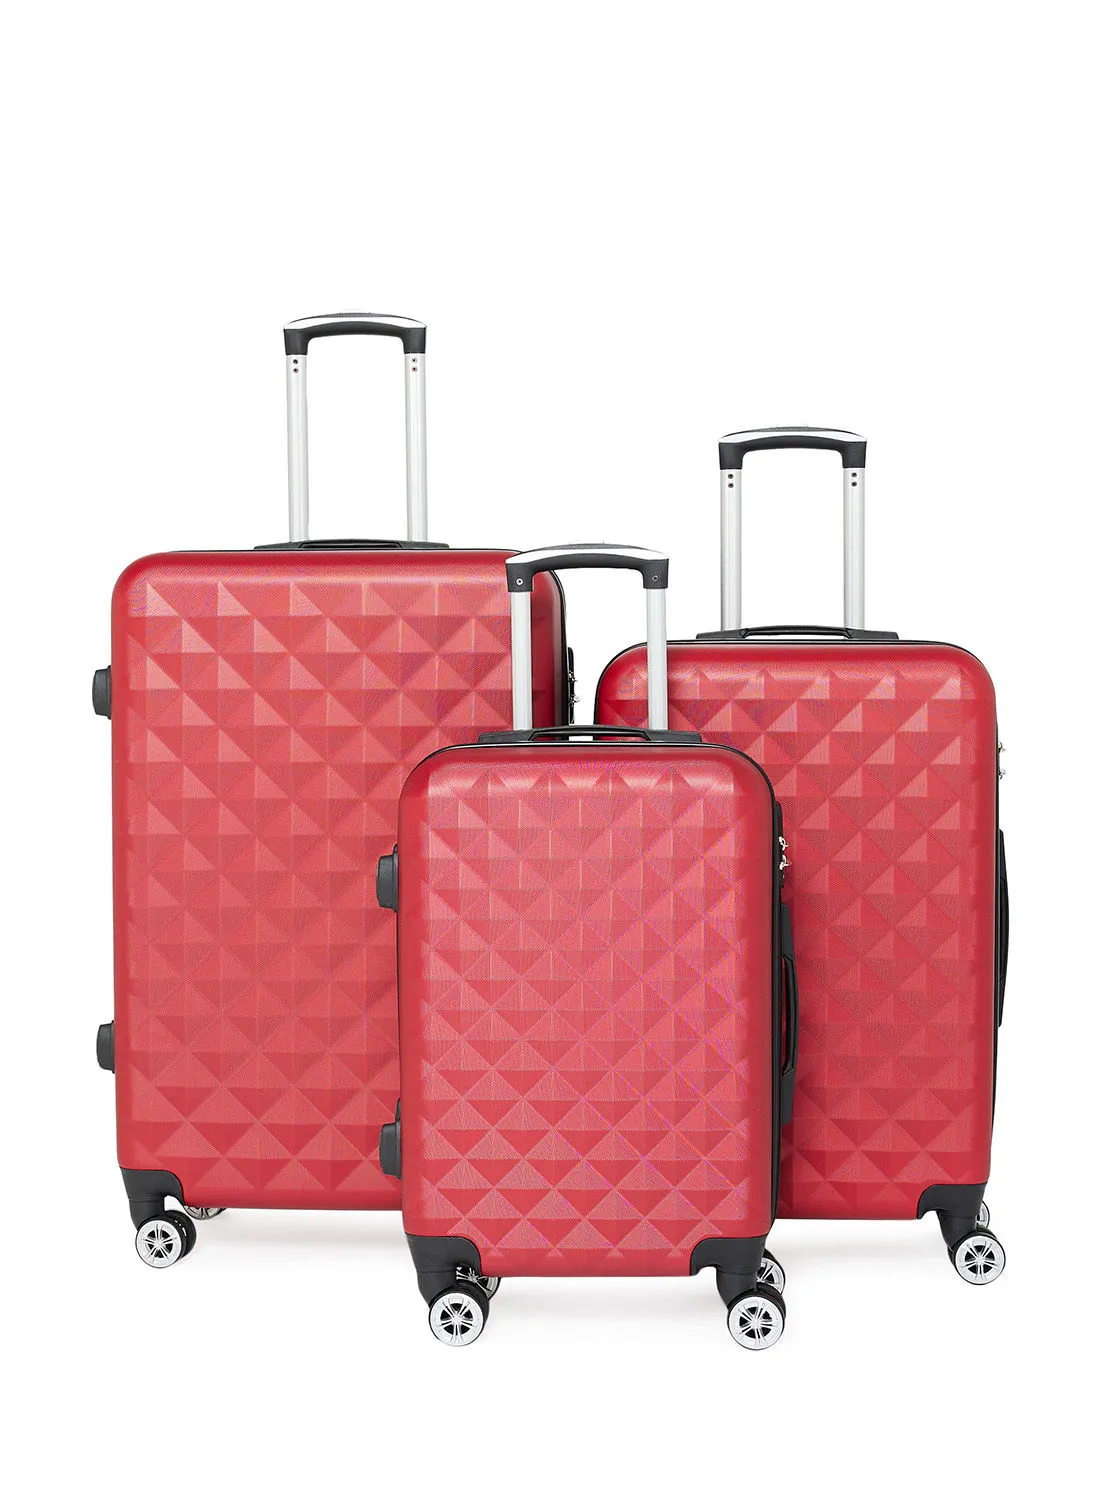 noon east 3-Piece ABS Hardside Spinner Iron Rod Luggage Trolley Set With TSA Lock 20/24/28 Inch Red